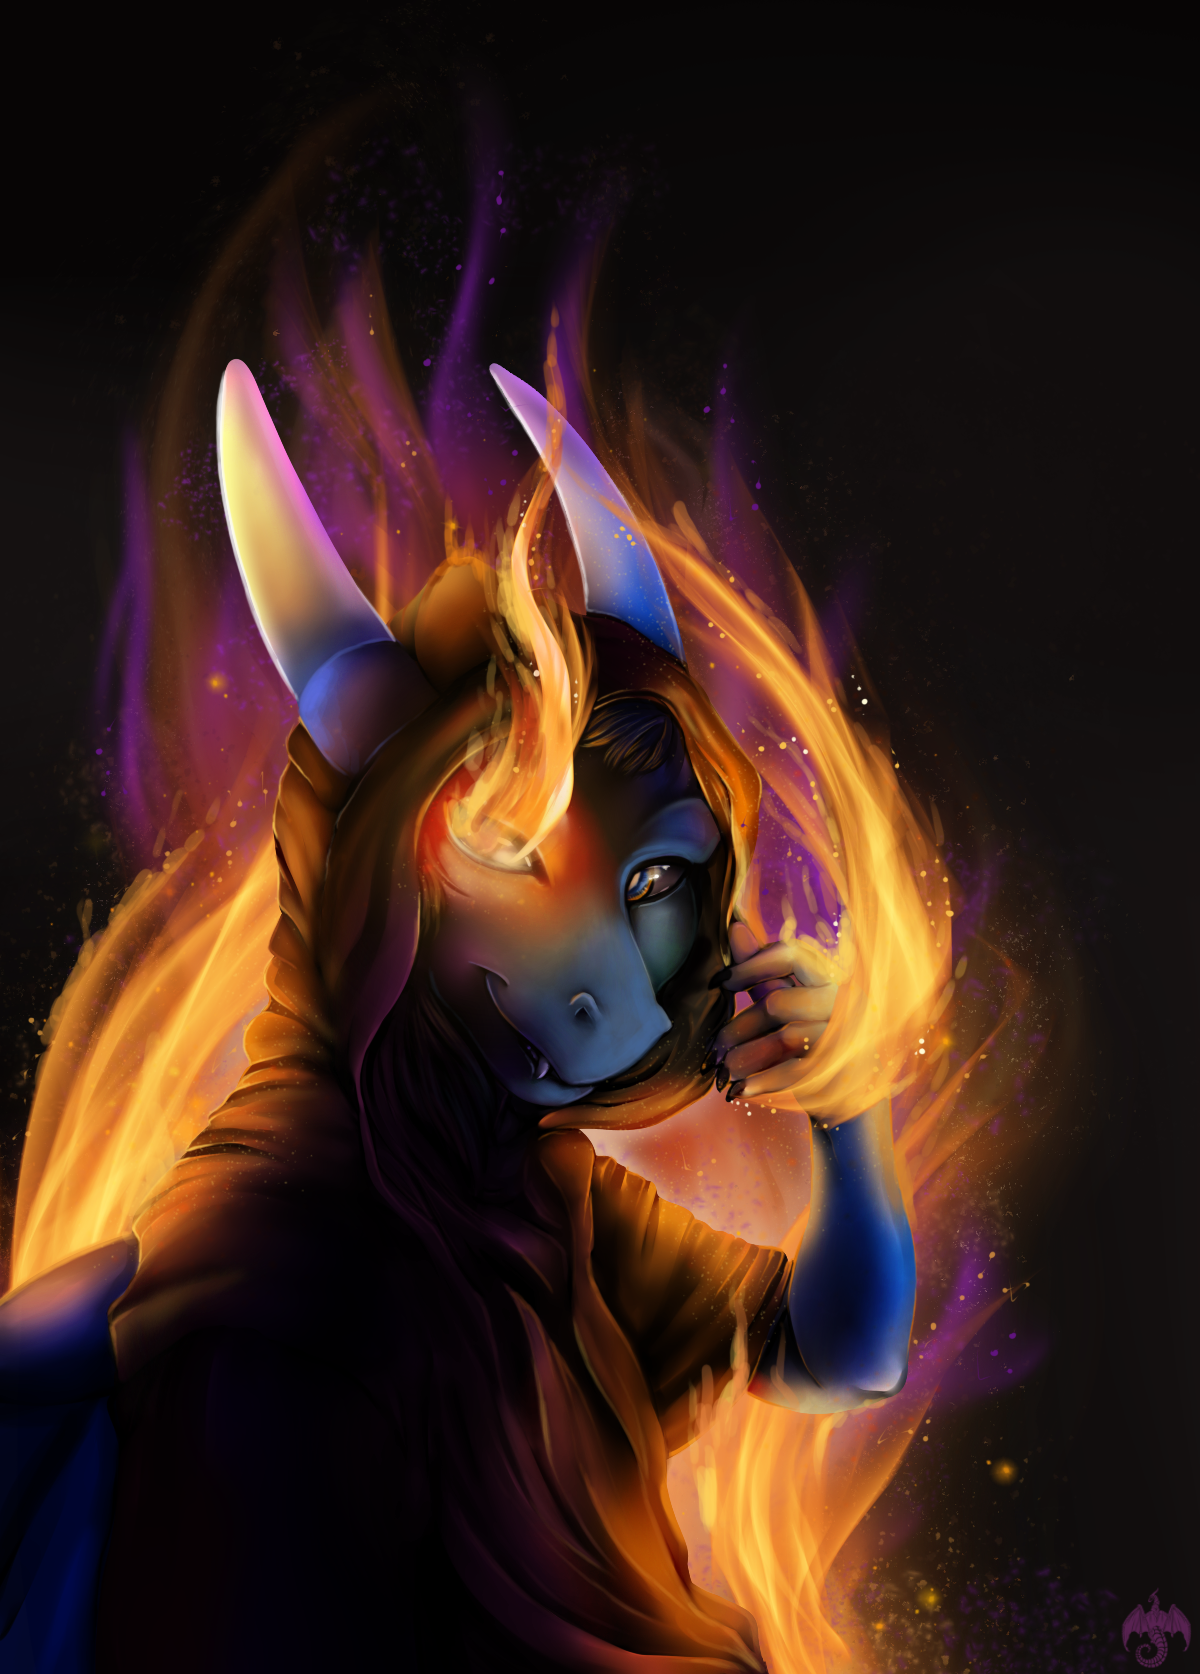 a_dragon_s_flame_by_celestialsunberry-d9ue0x9.png